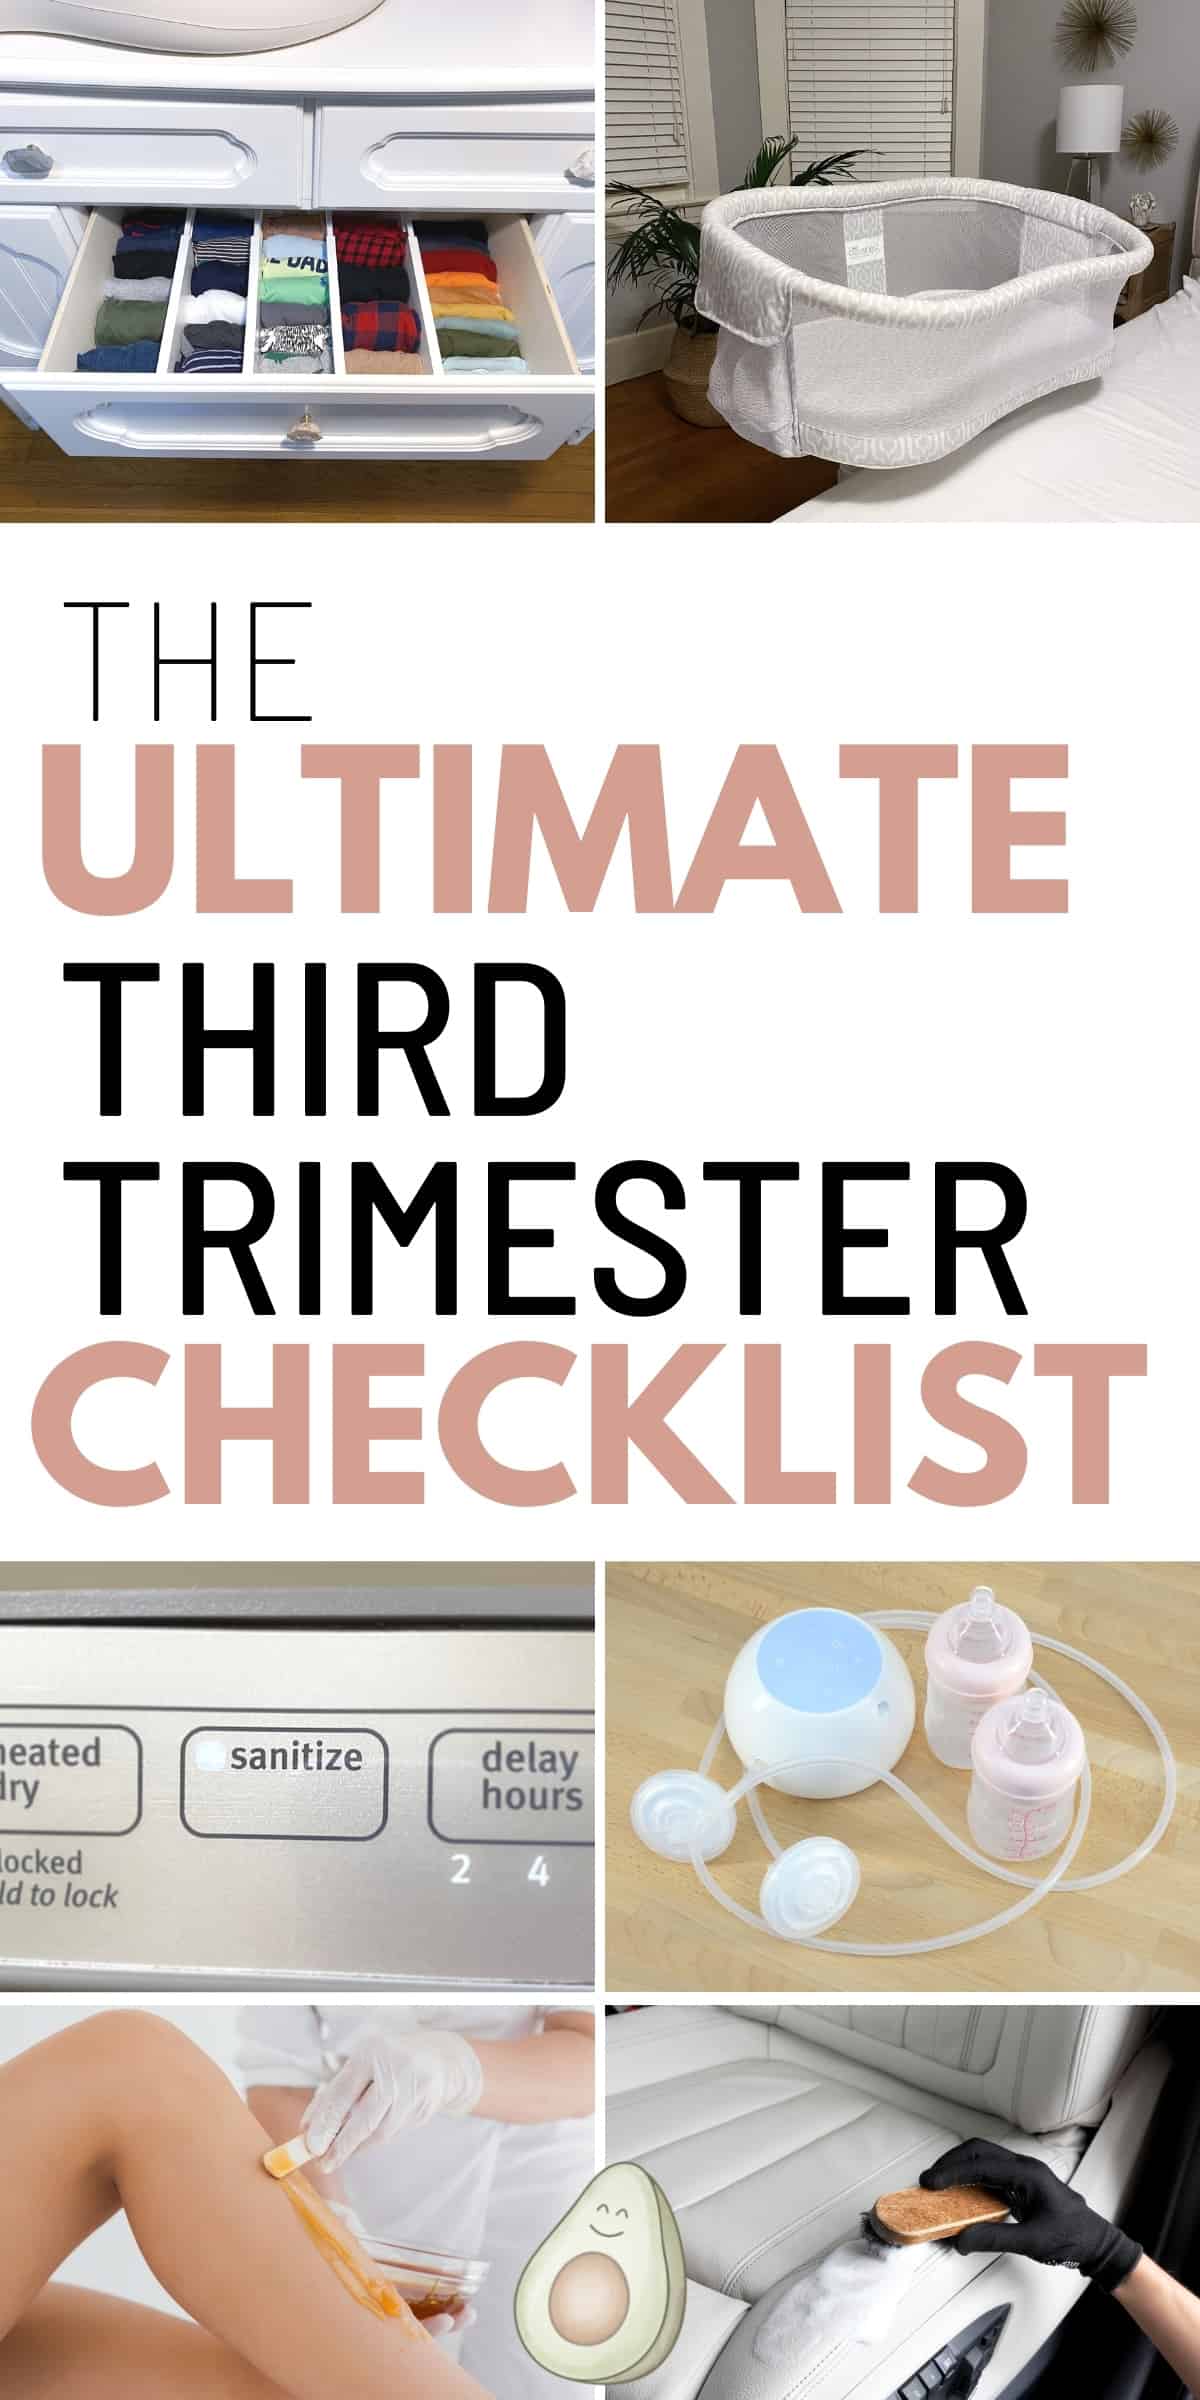 the ultimate third trimester checklist